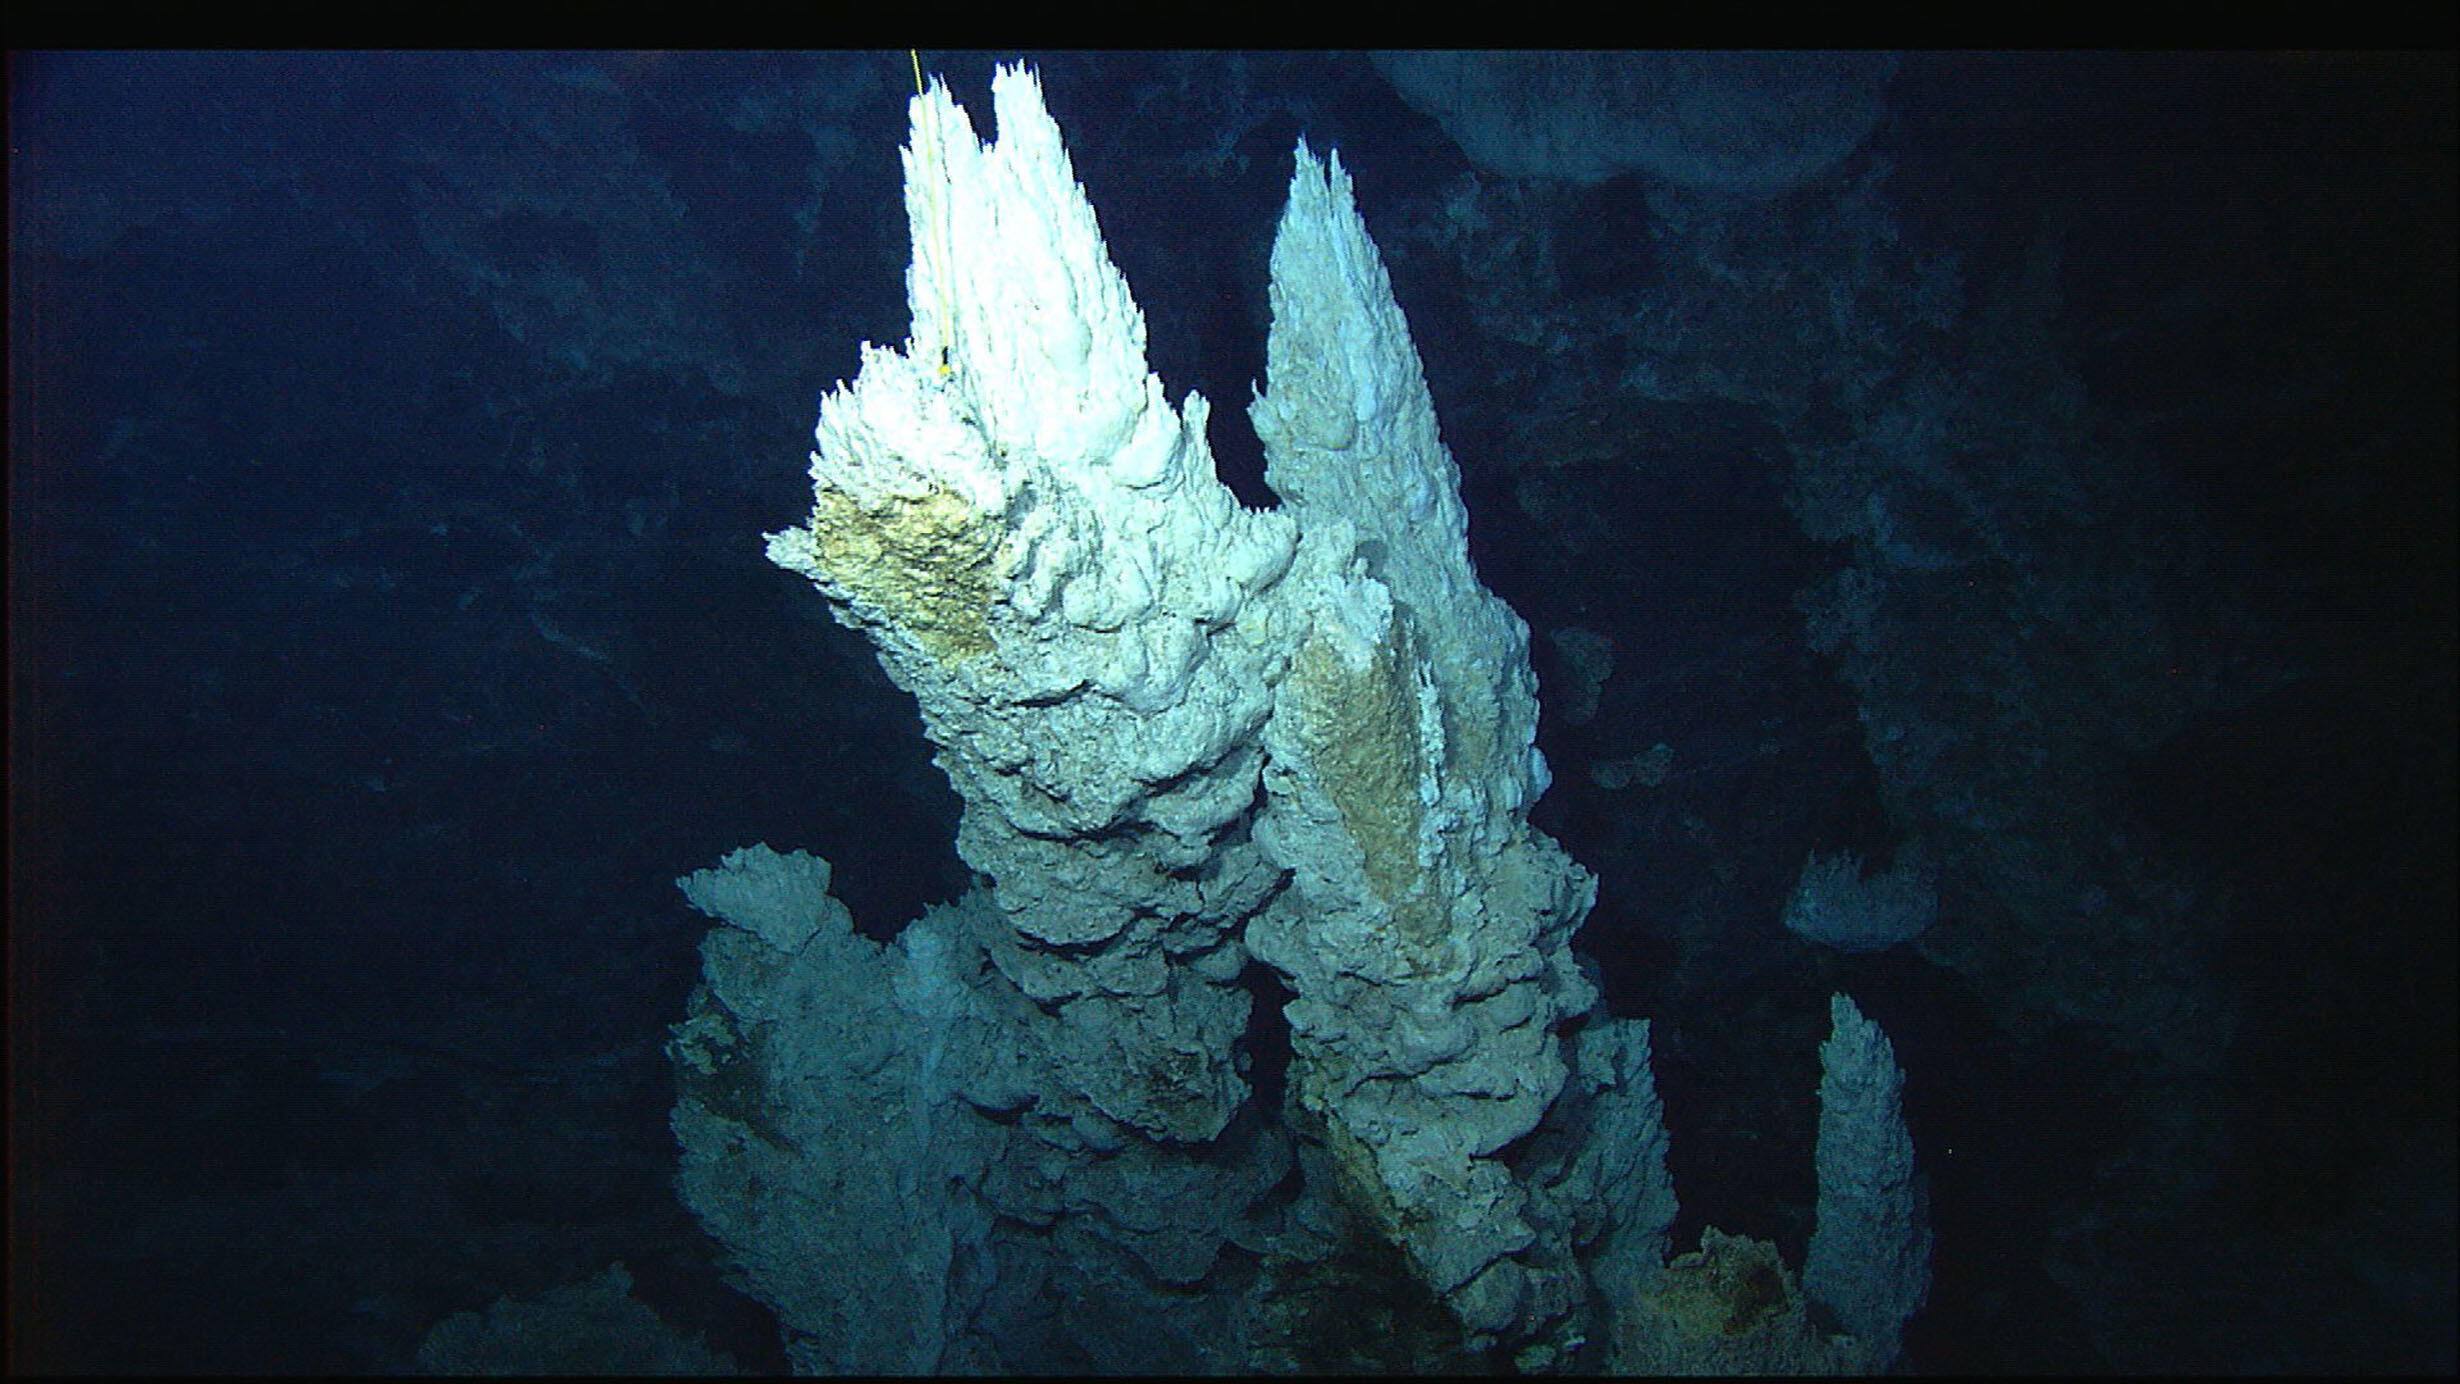 Jagged thin spires of hydrothermal vents underwater.